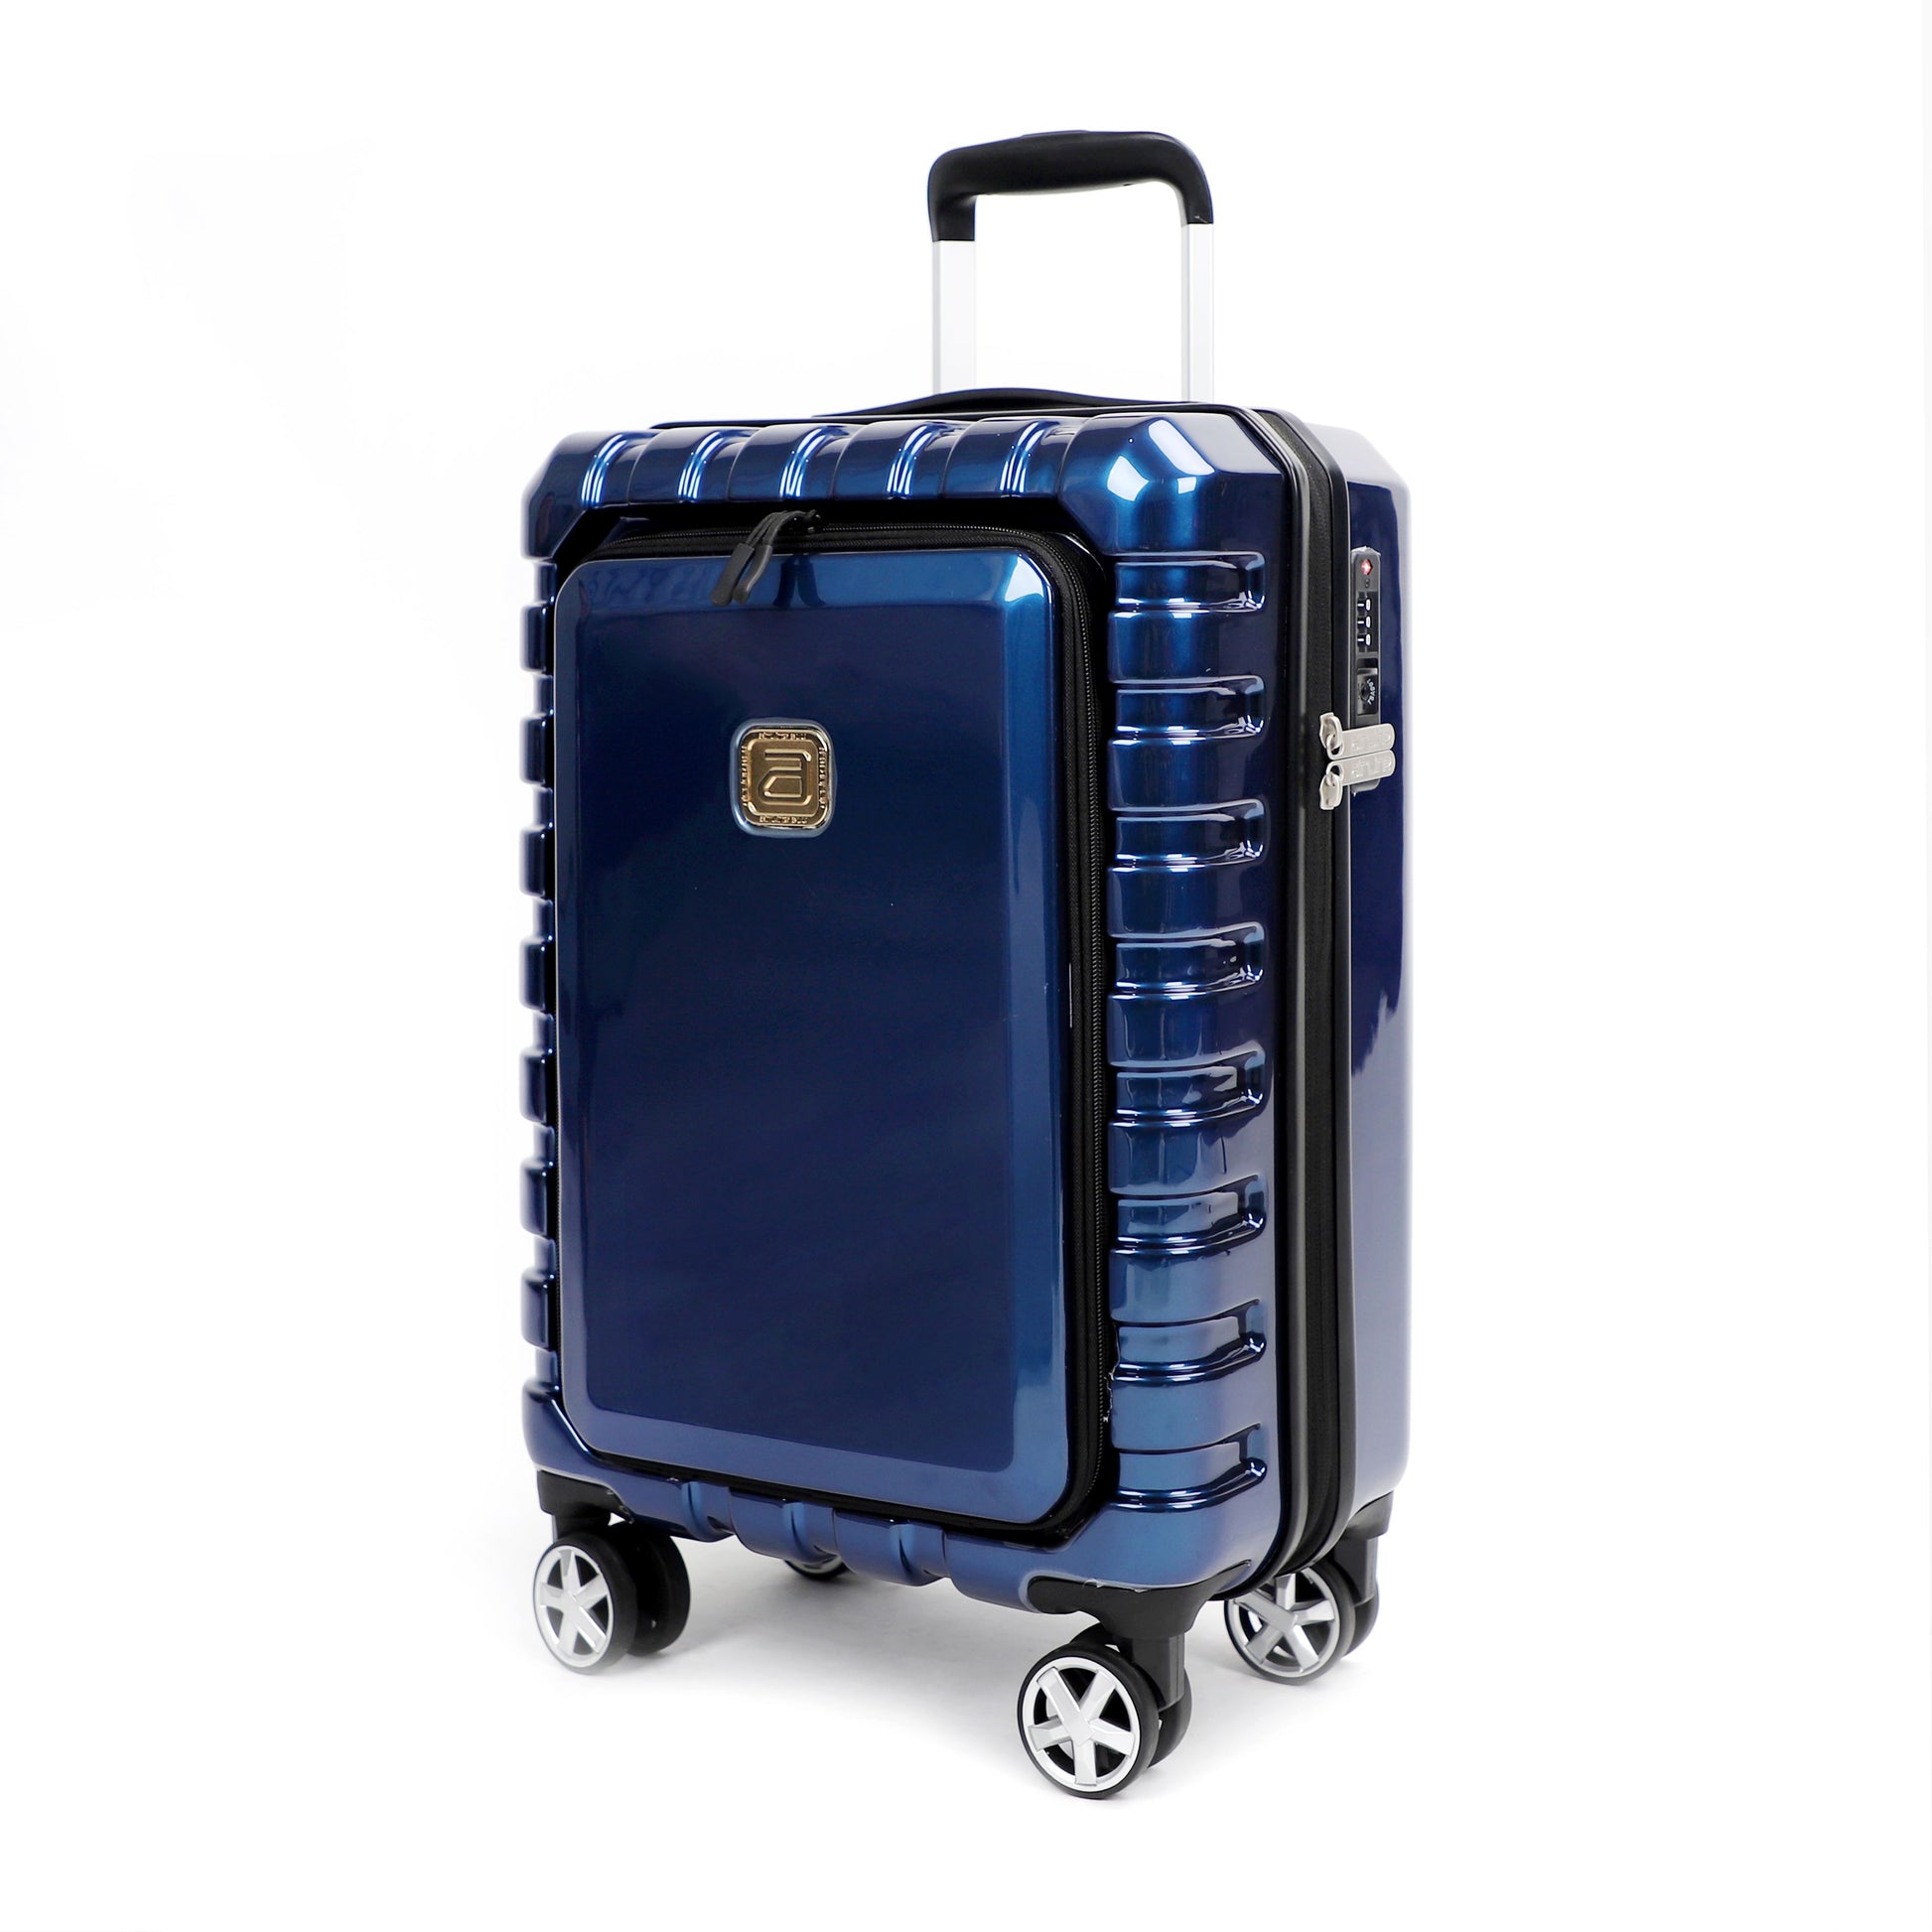 Airline_Carry_On_Luggage_Blue_Side_view_T1978155005